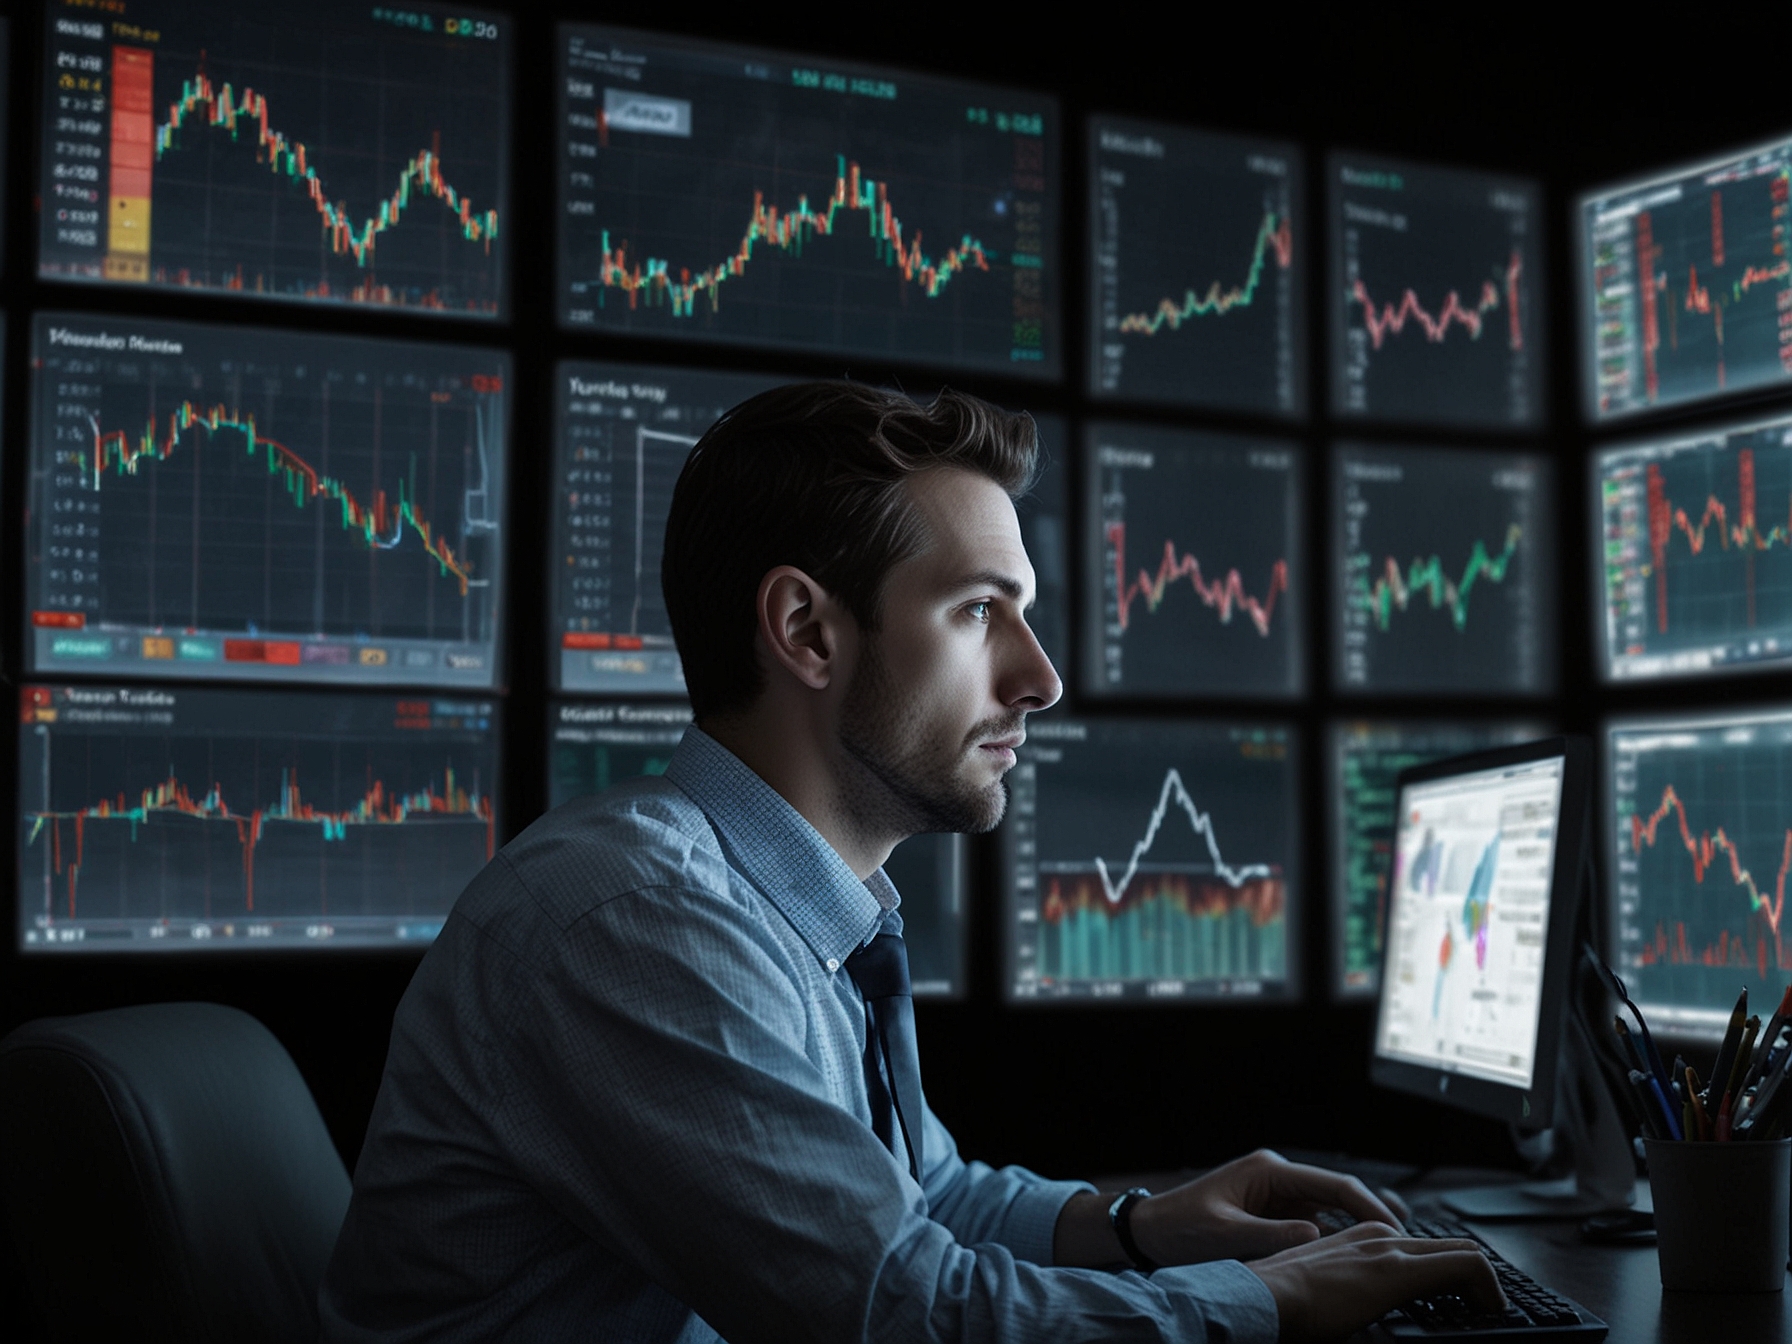 An investor anxiously monitors the stock market on their computer screen, symbolizing the temptation to time the market.